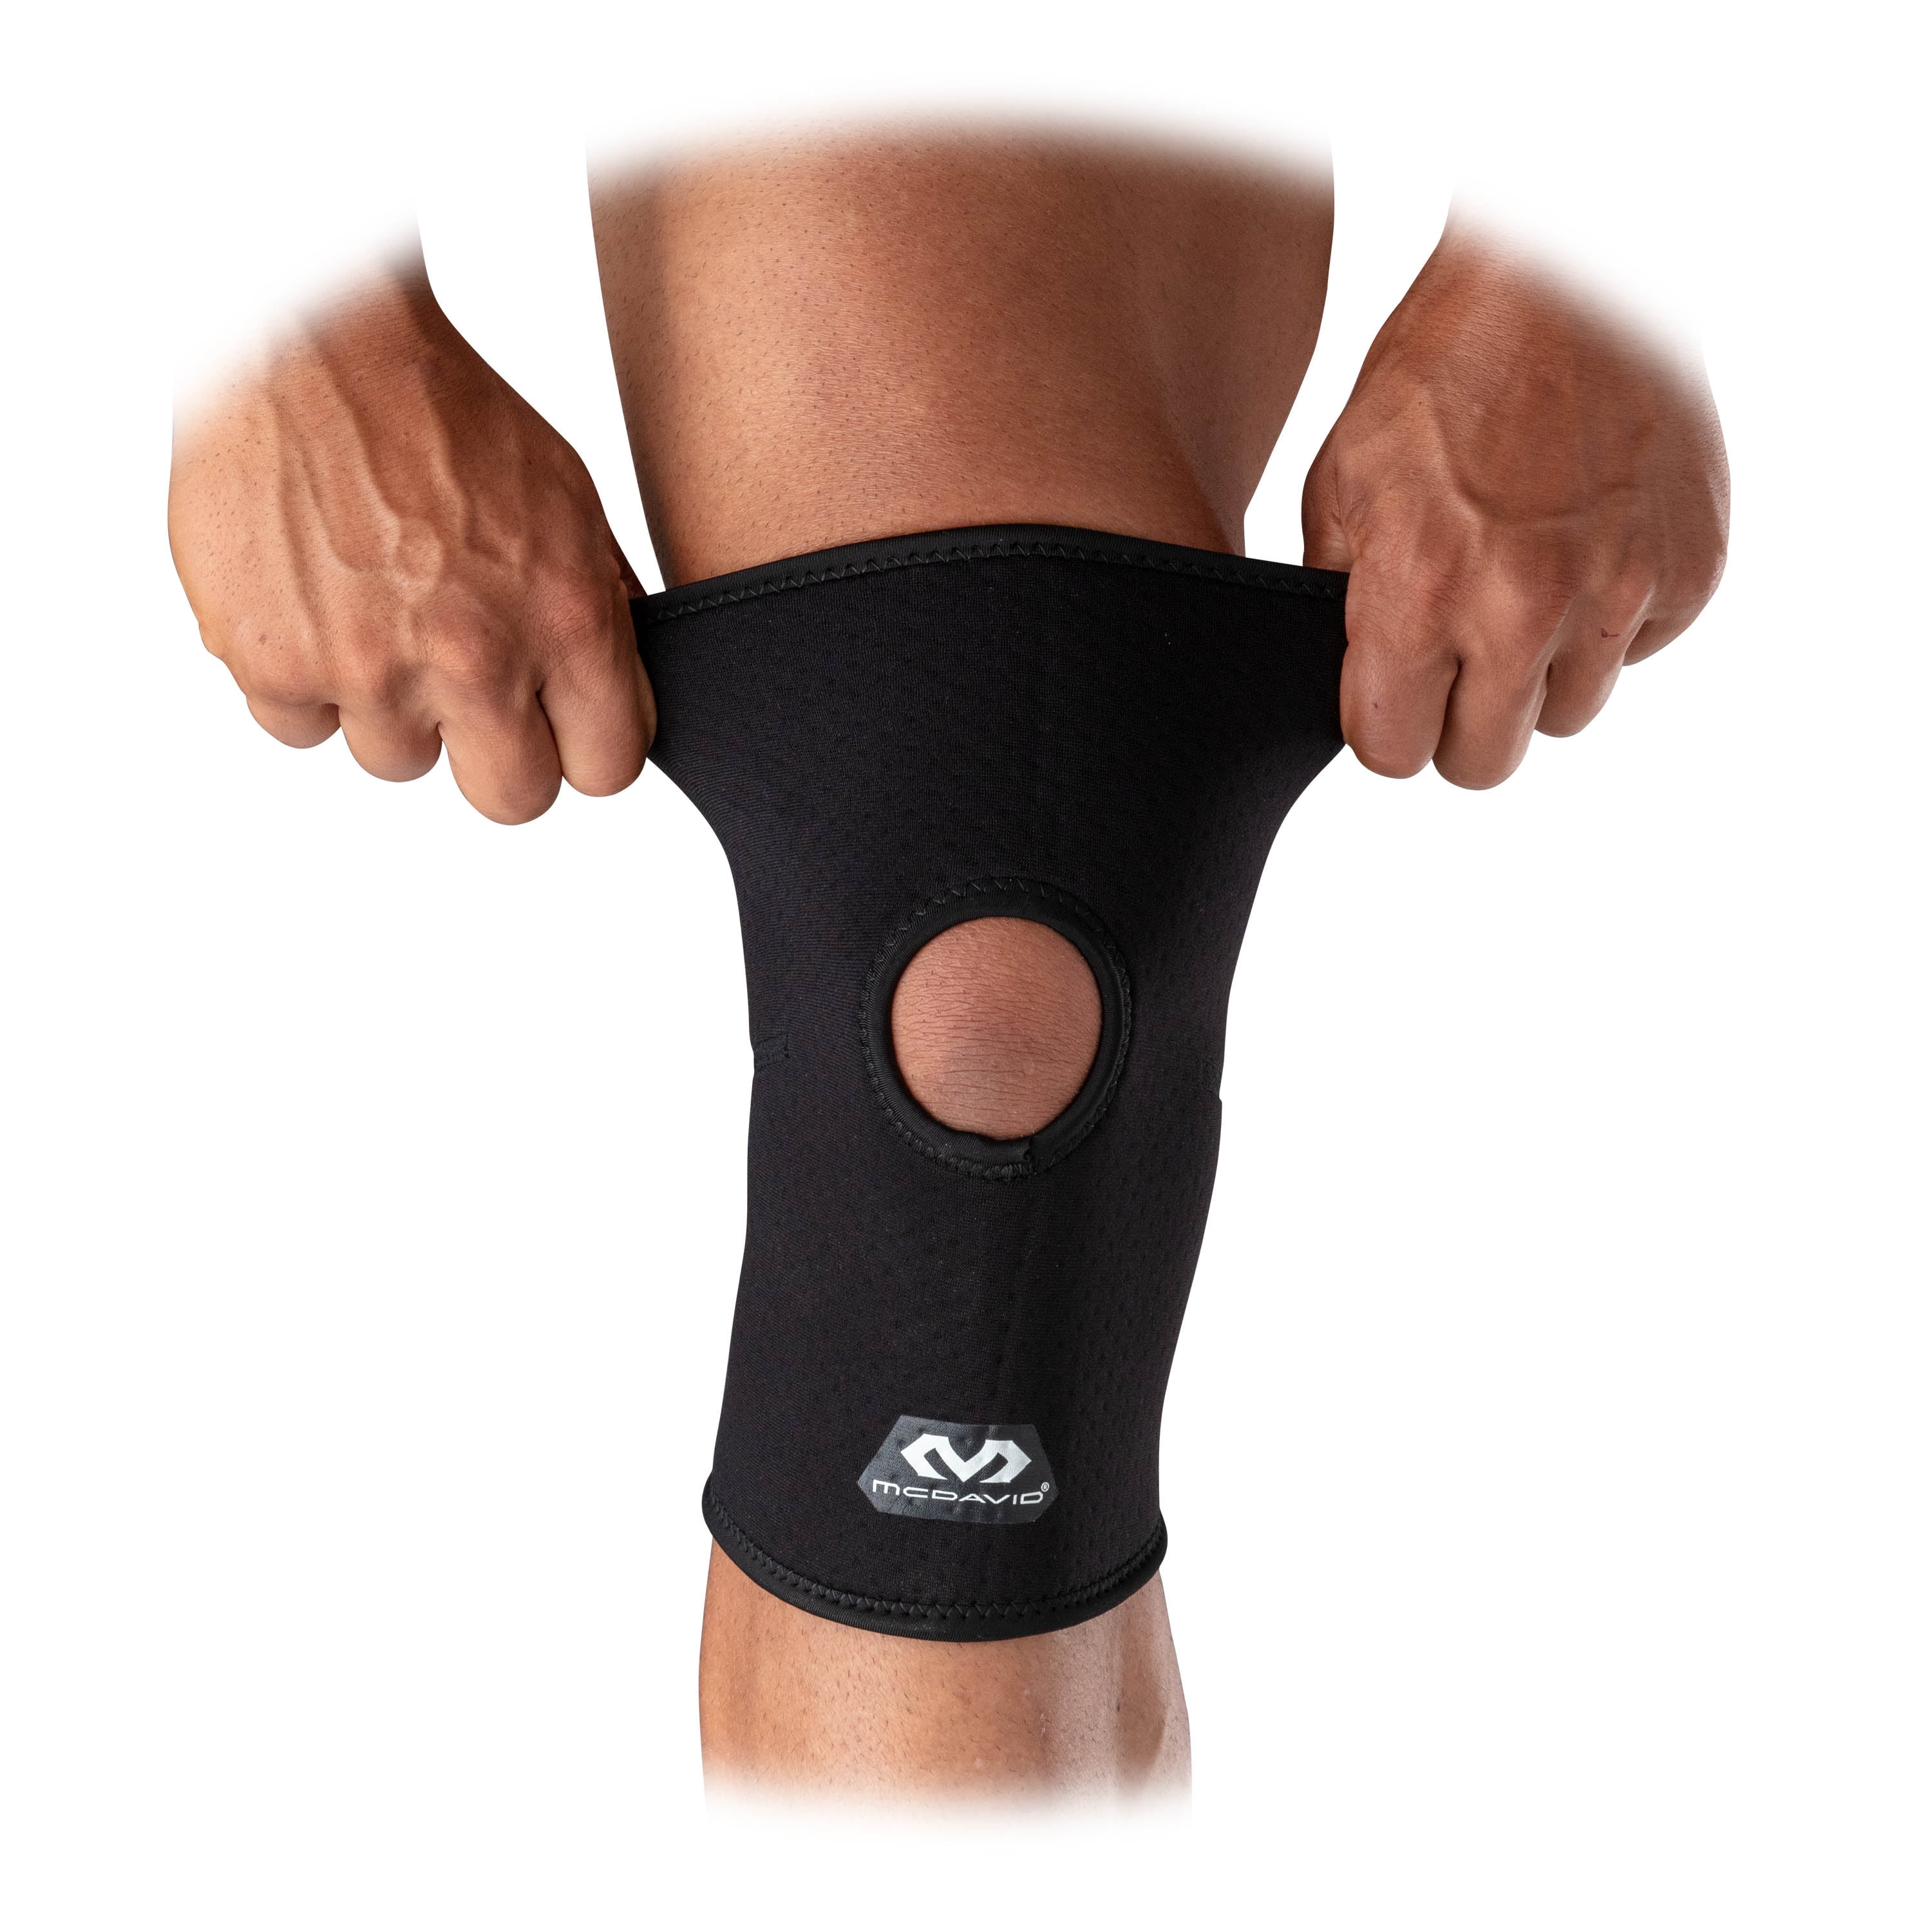 McDavid Sport Injury and Pain Relief Black Compression Knee Sleeve